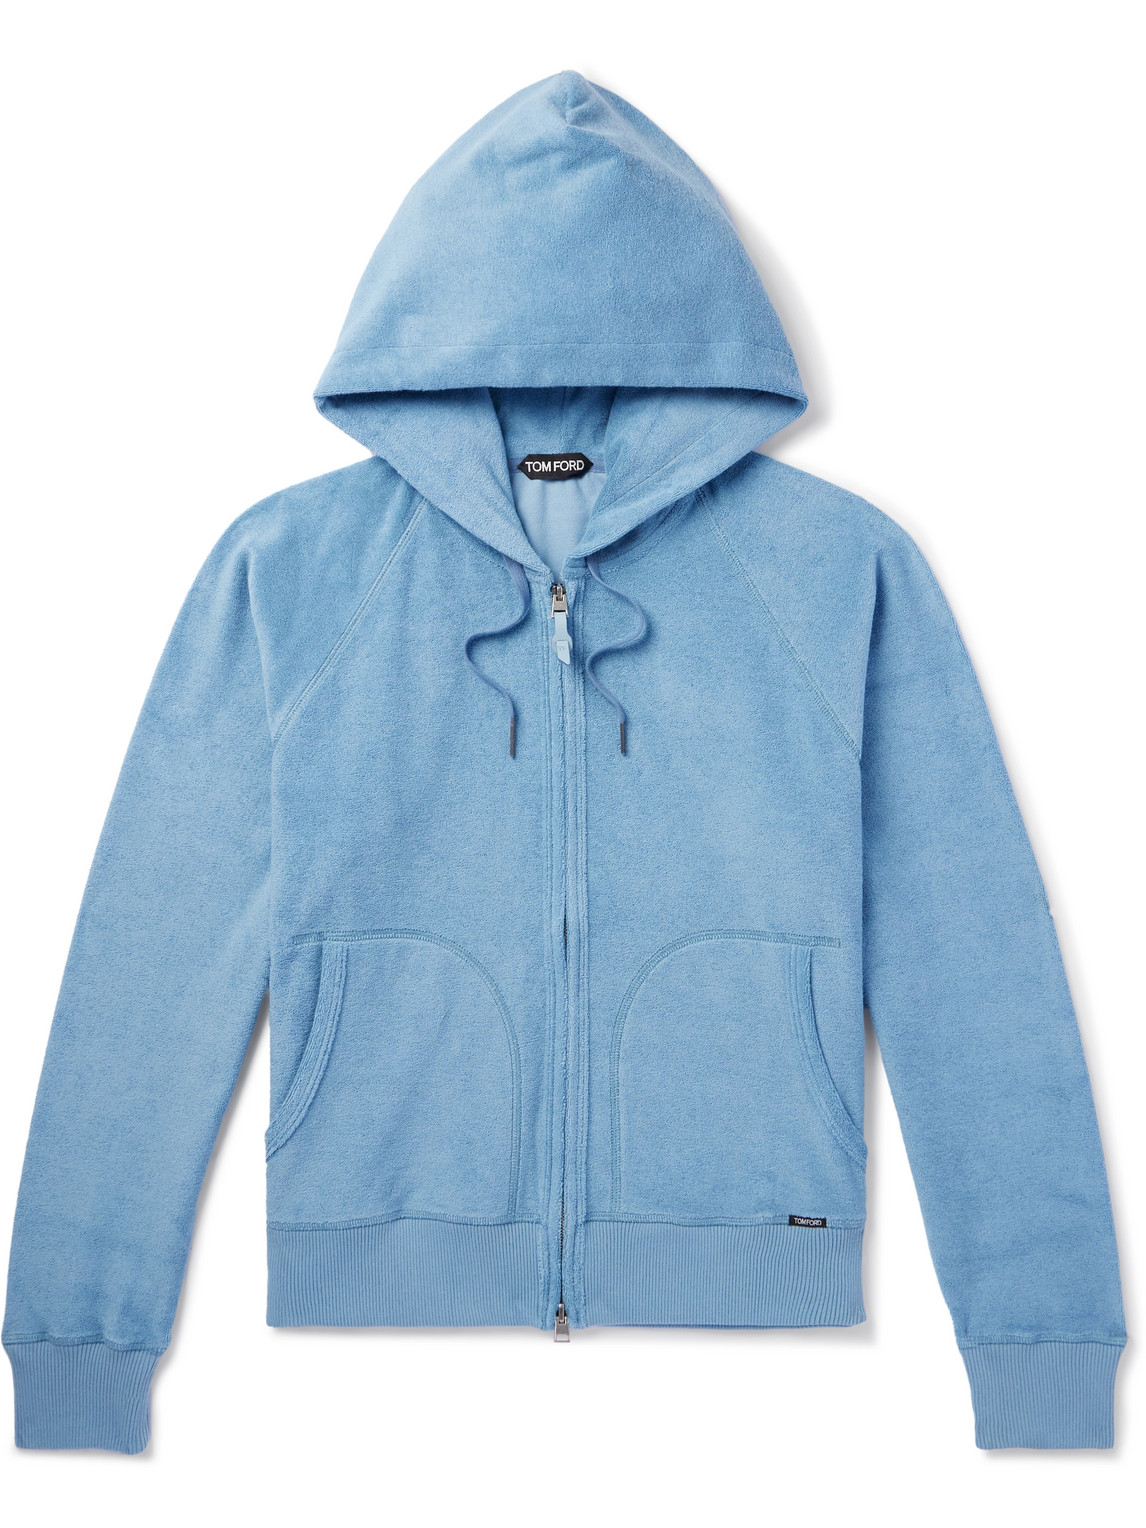 TOM FORD - Towelling Cotton-Terry Zip-Up Hoodie - Men - Blue - IT 46 von TOM FORD